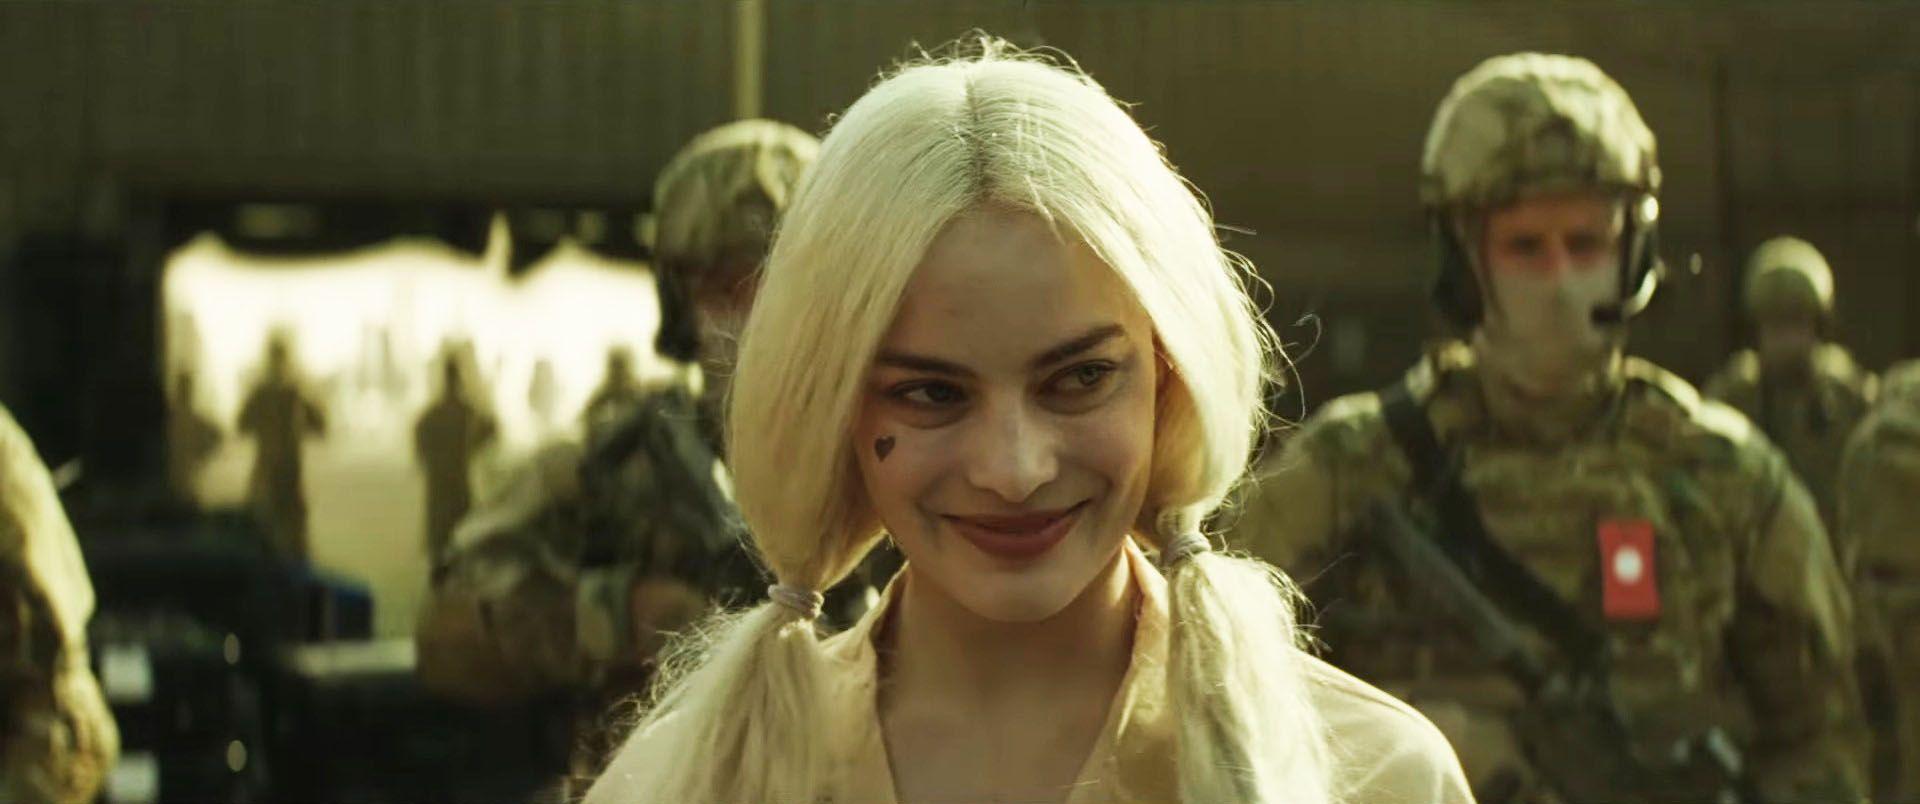 Birds of Prey teaser trailer won't be available online